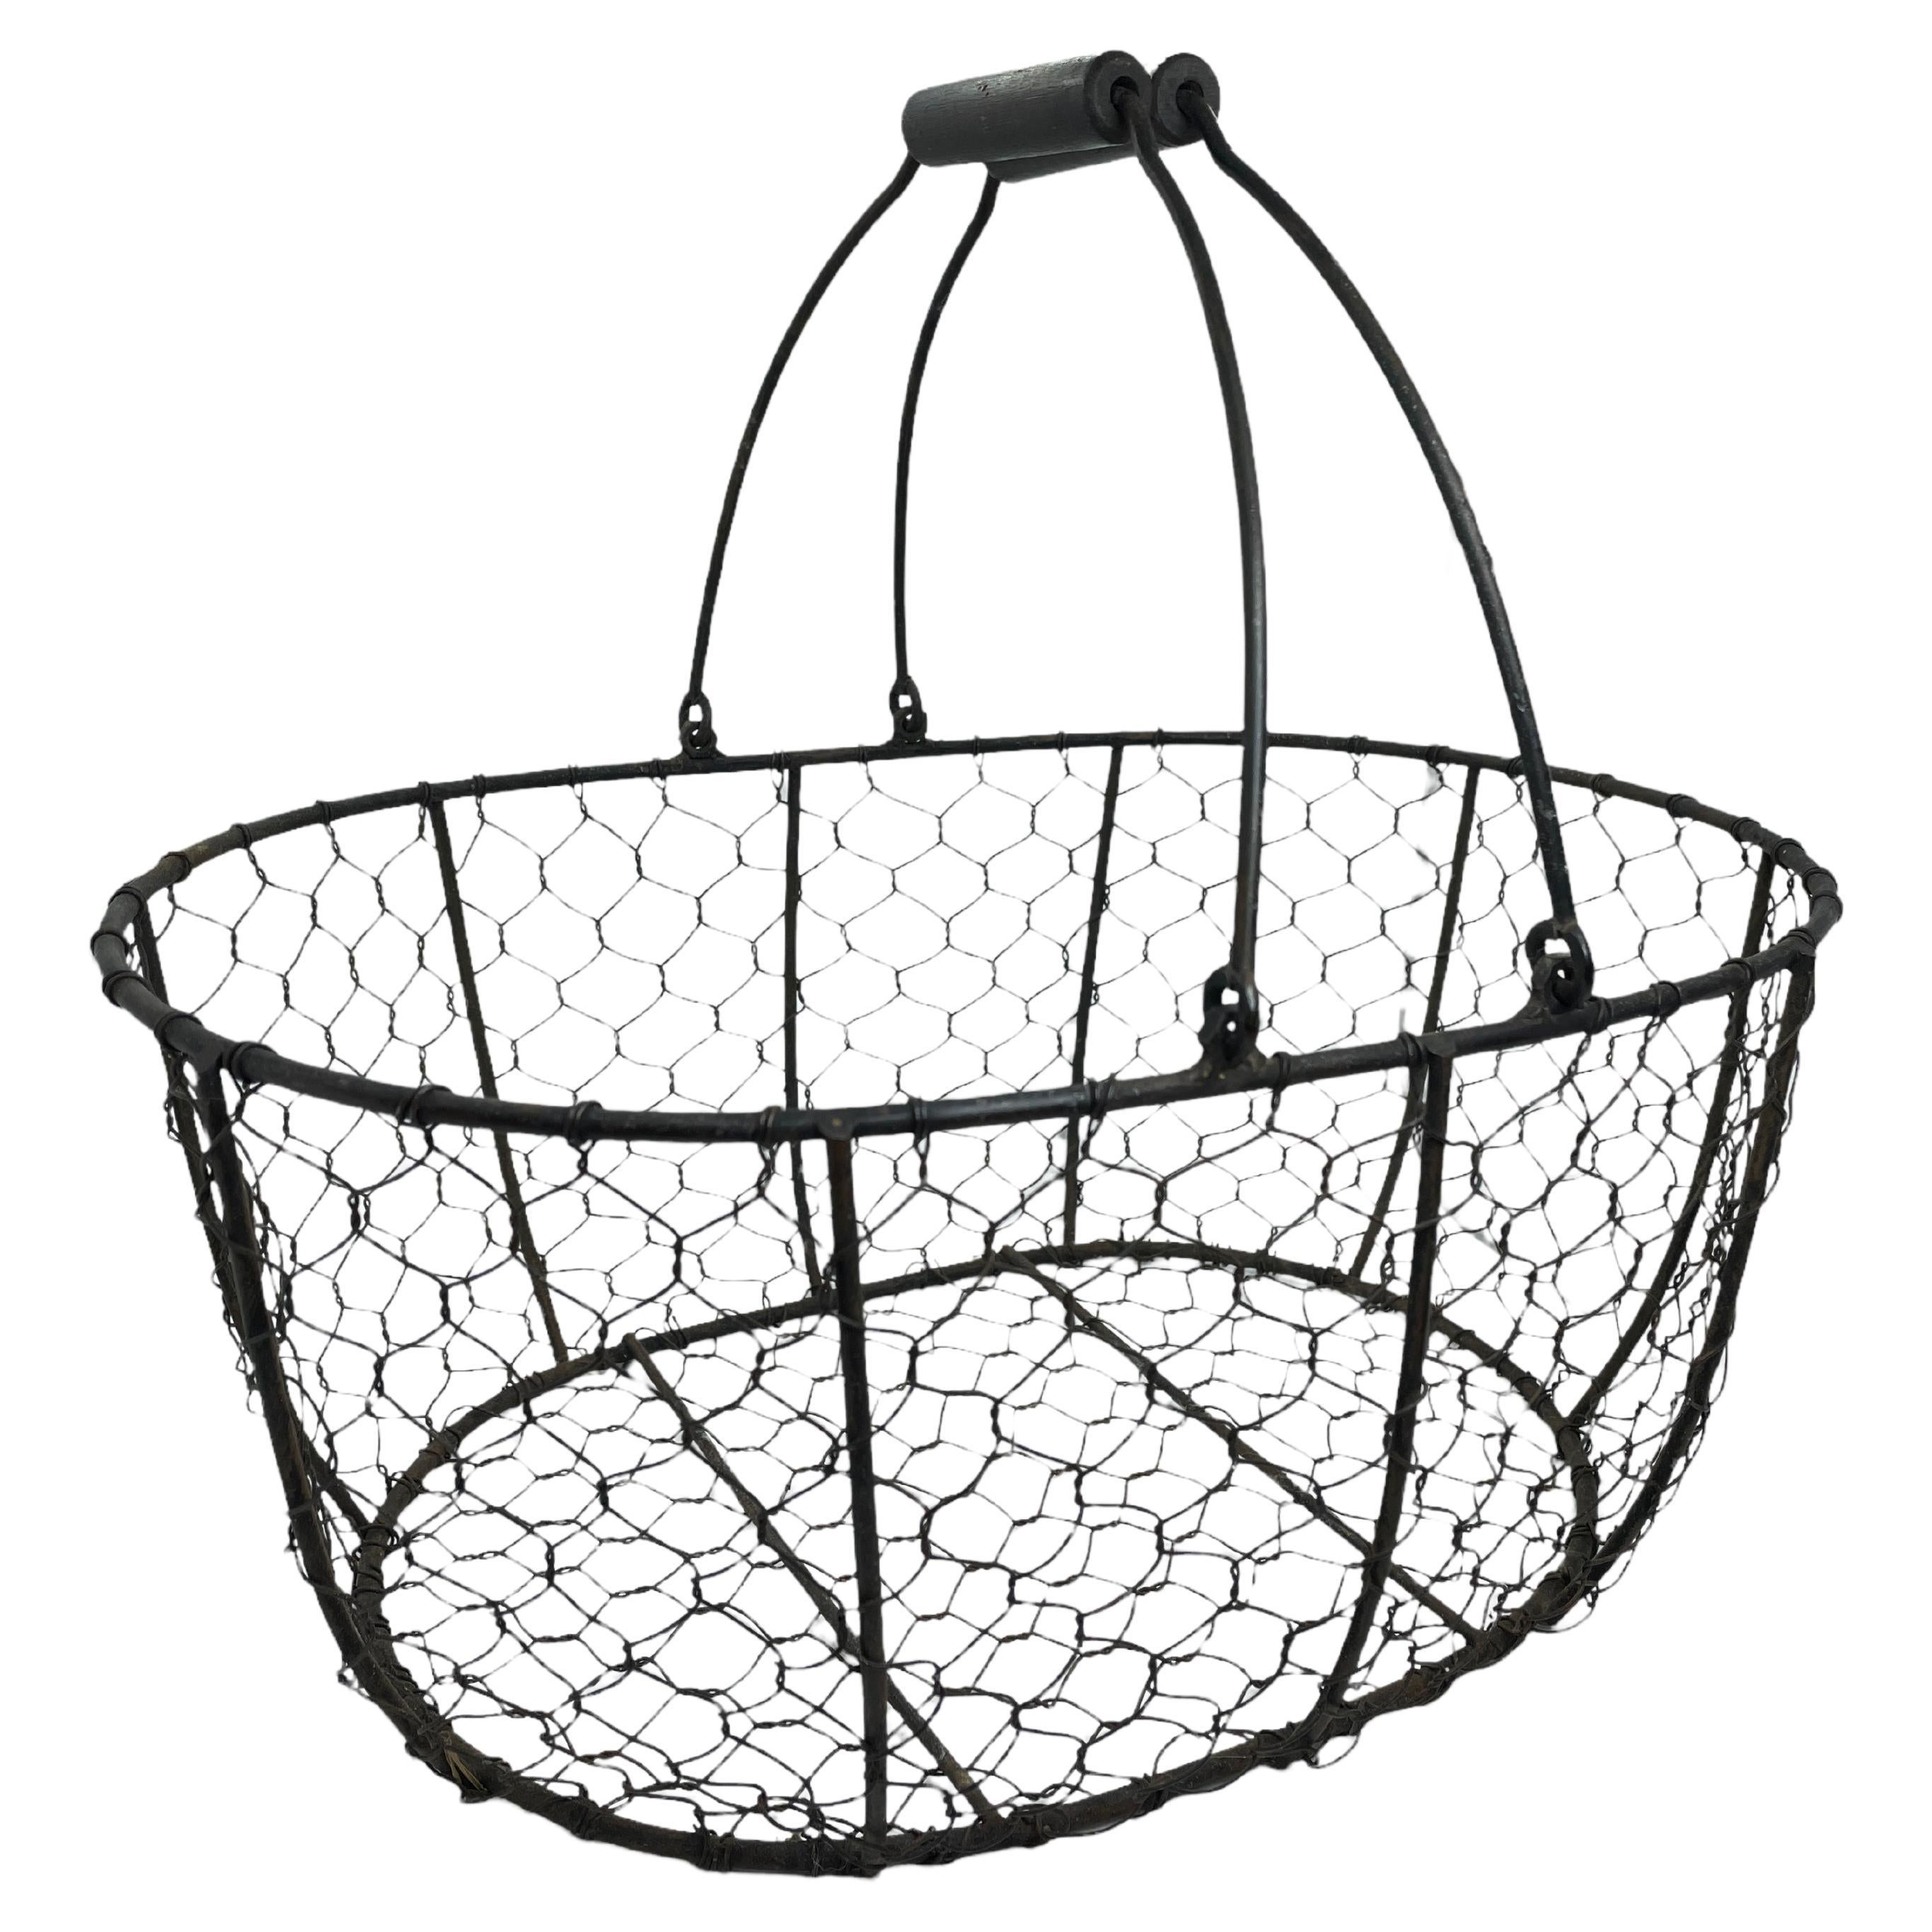 Farmhouse Chicken Wire Egg Basket Carry All, Vintage Industrial Austria